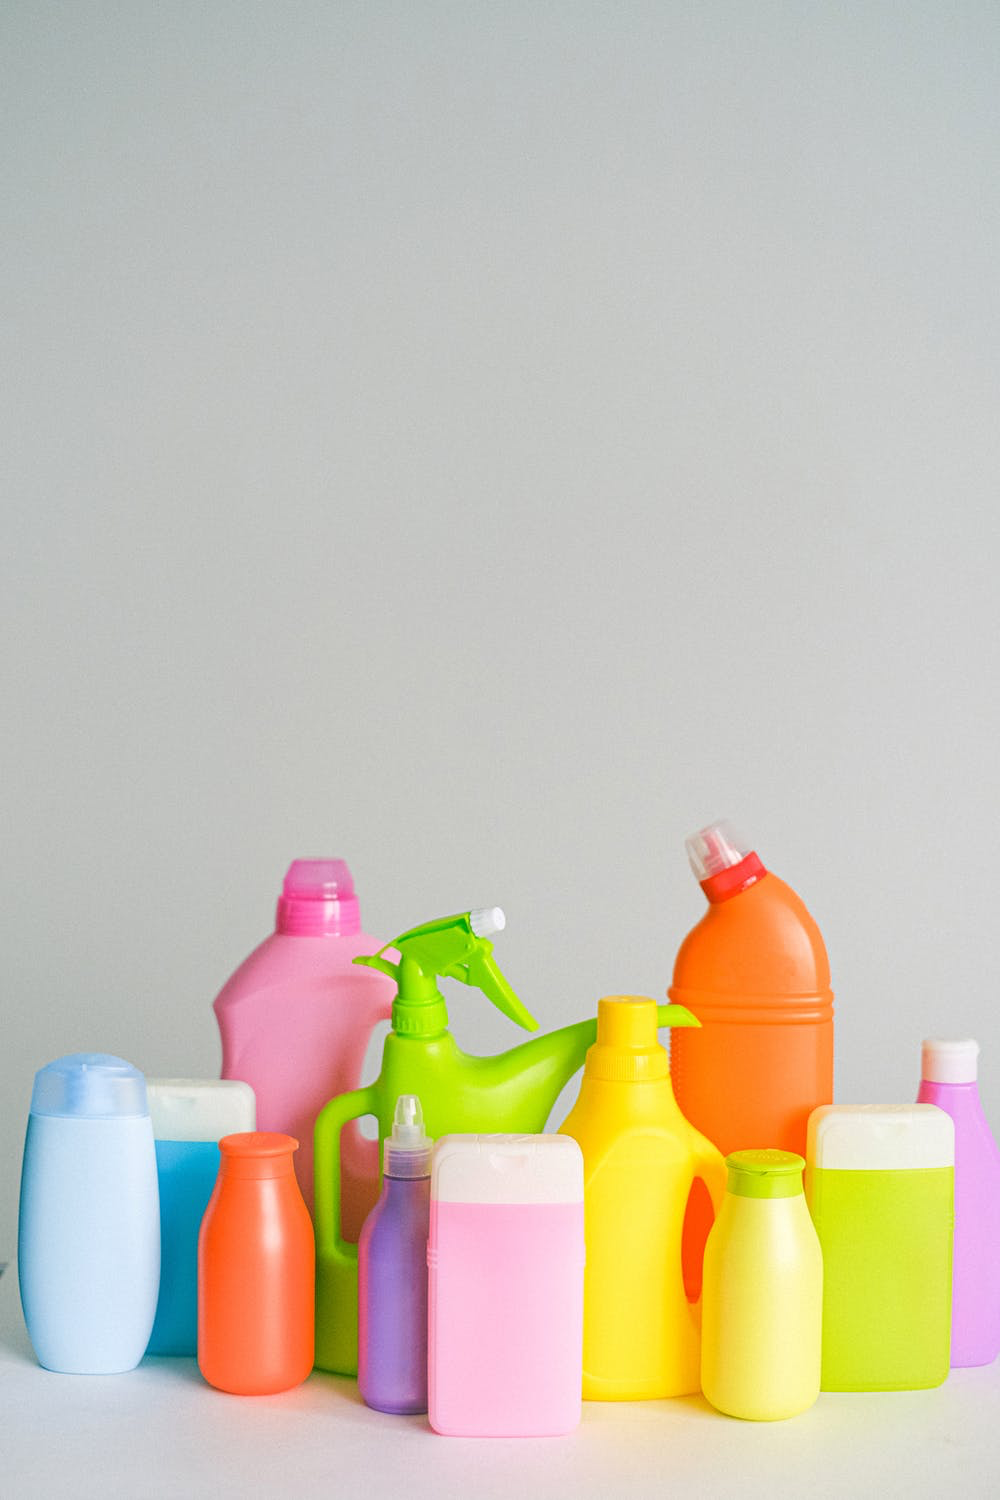 bottles-of-chemical-products-for-cleaning